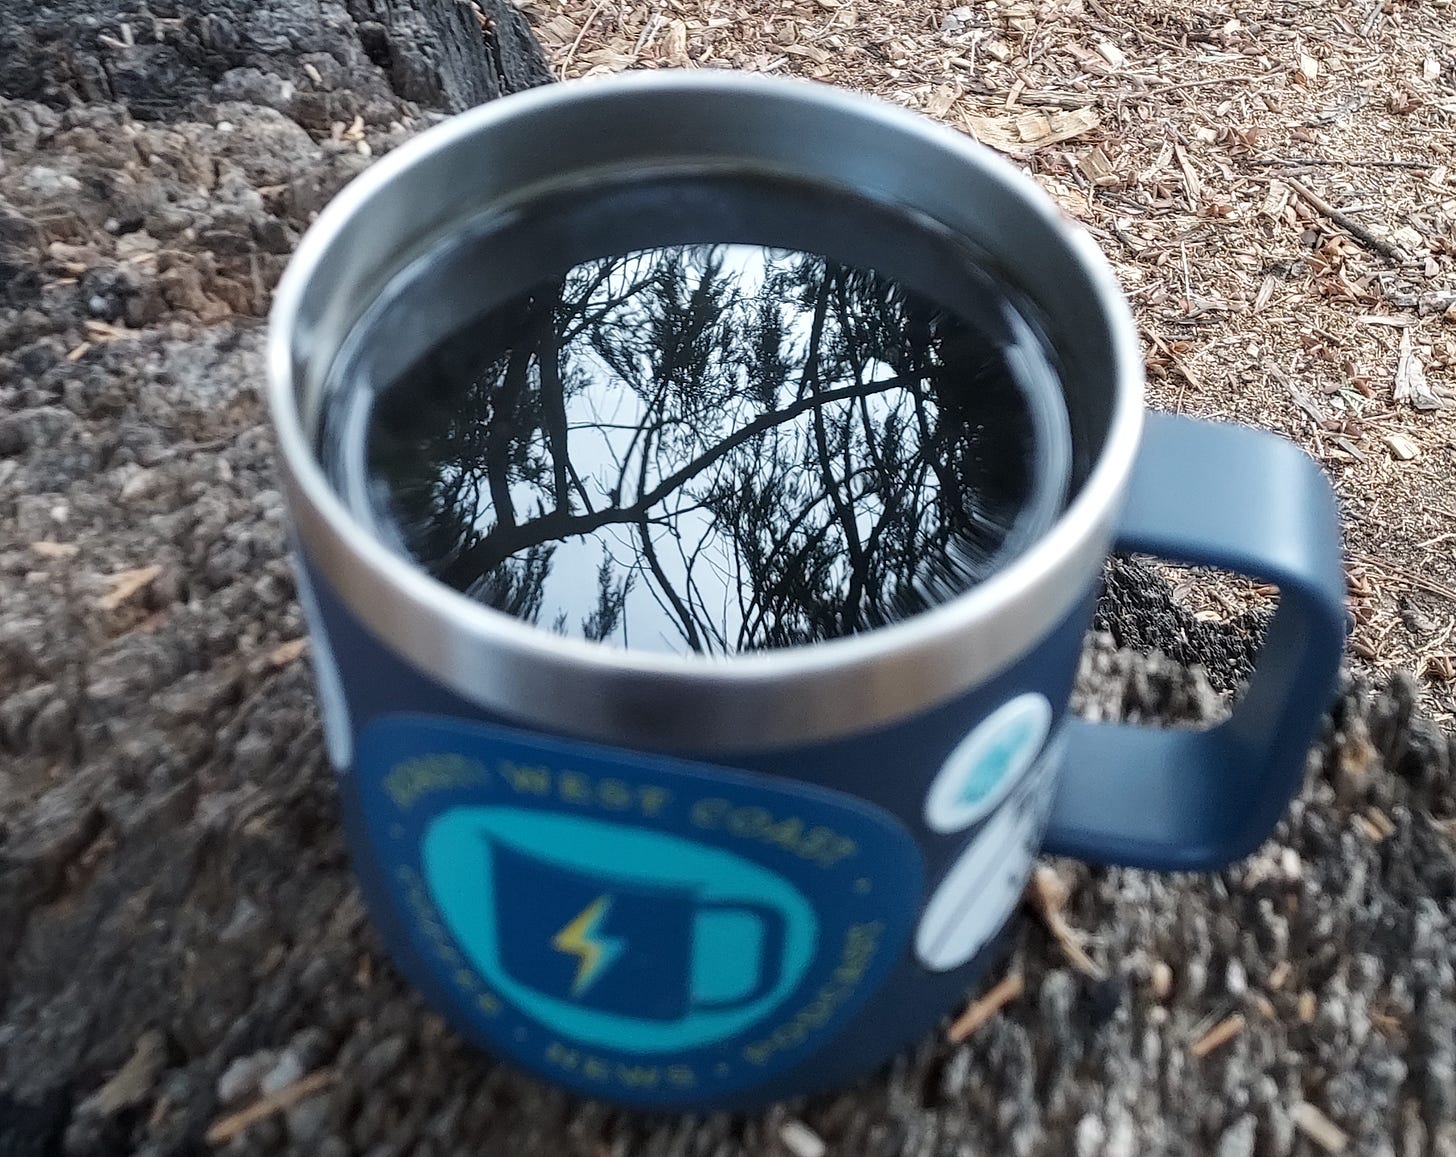 A close up of the reflection of pine trees in the top of a cup of coffee sitting on a stump.